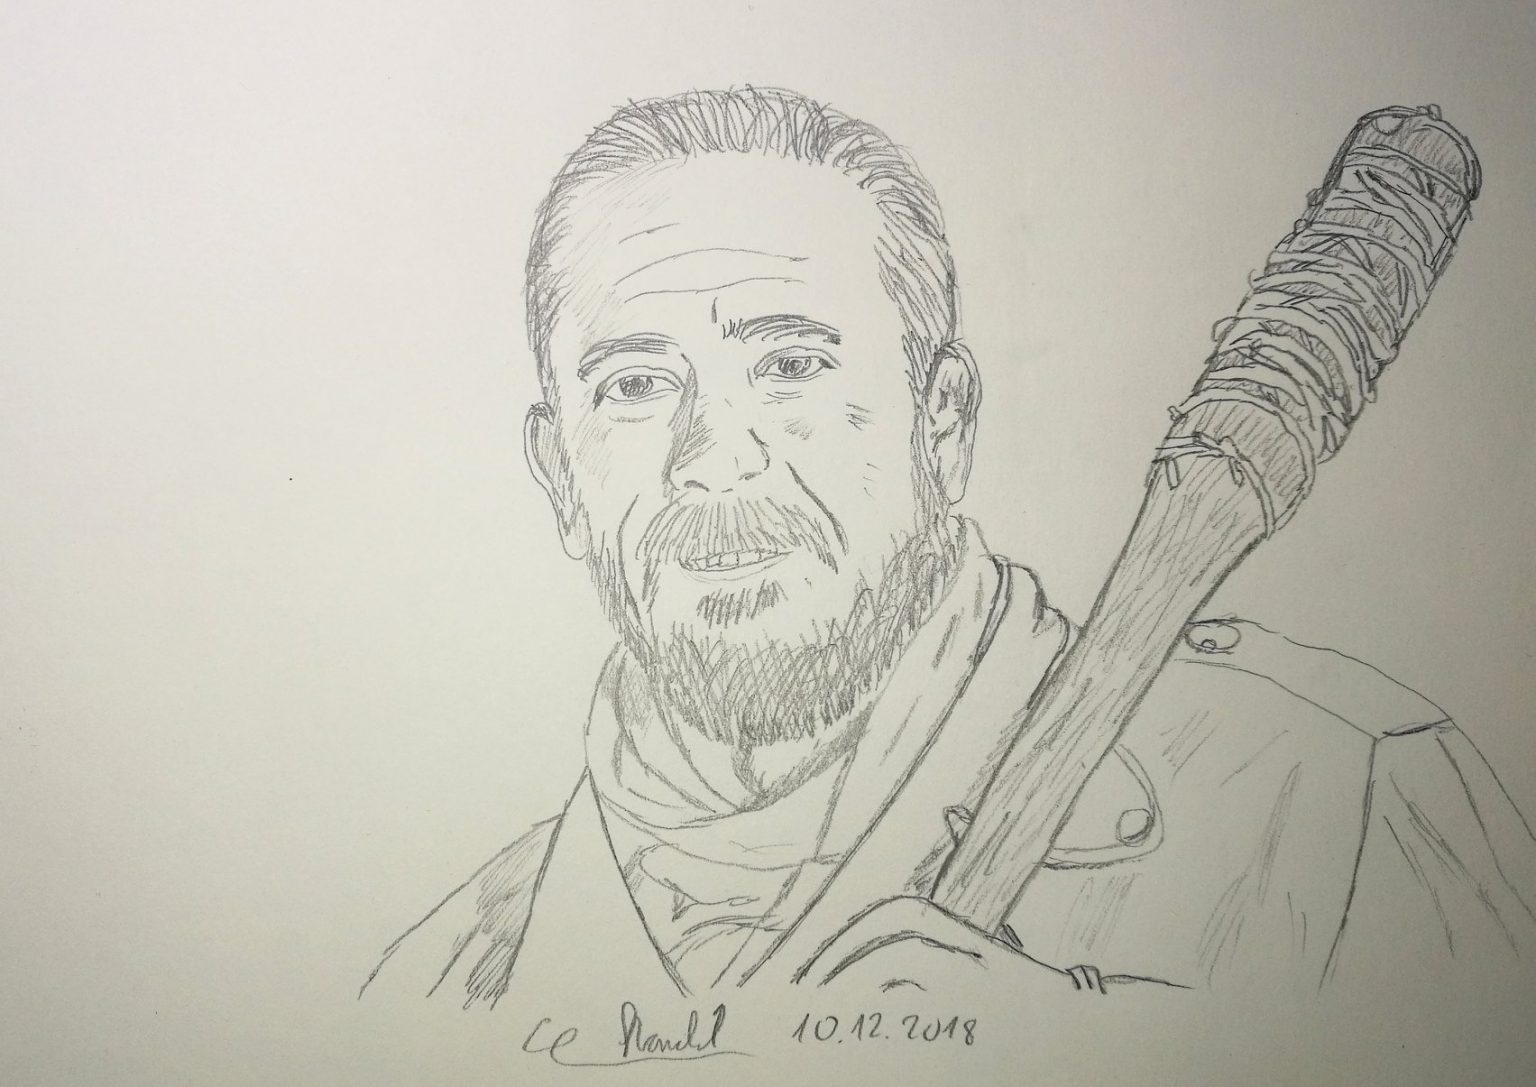 How To Draw Negan And Lucille The Walking Dead Drawin 0405